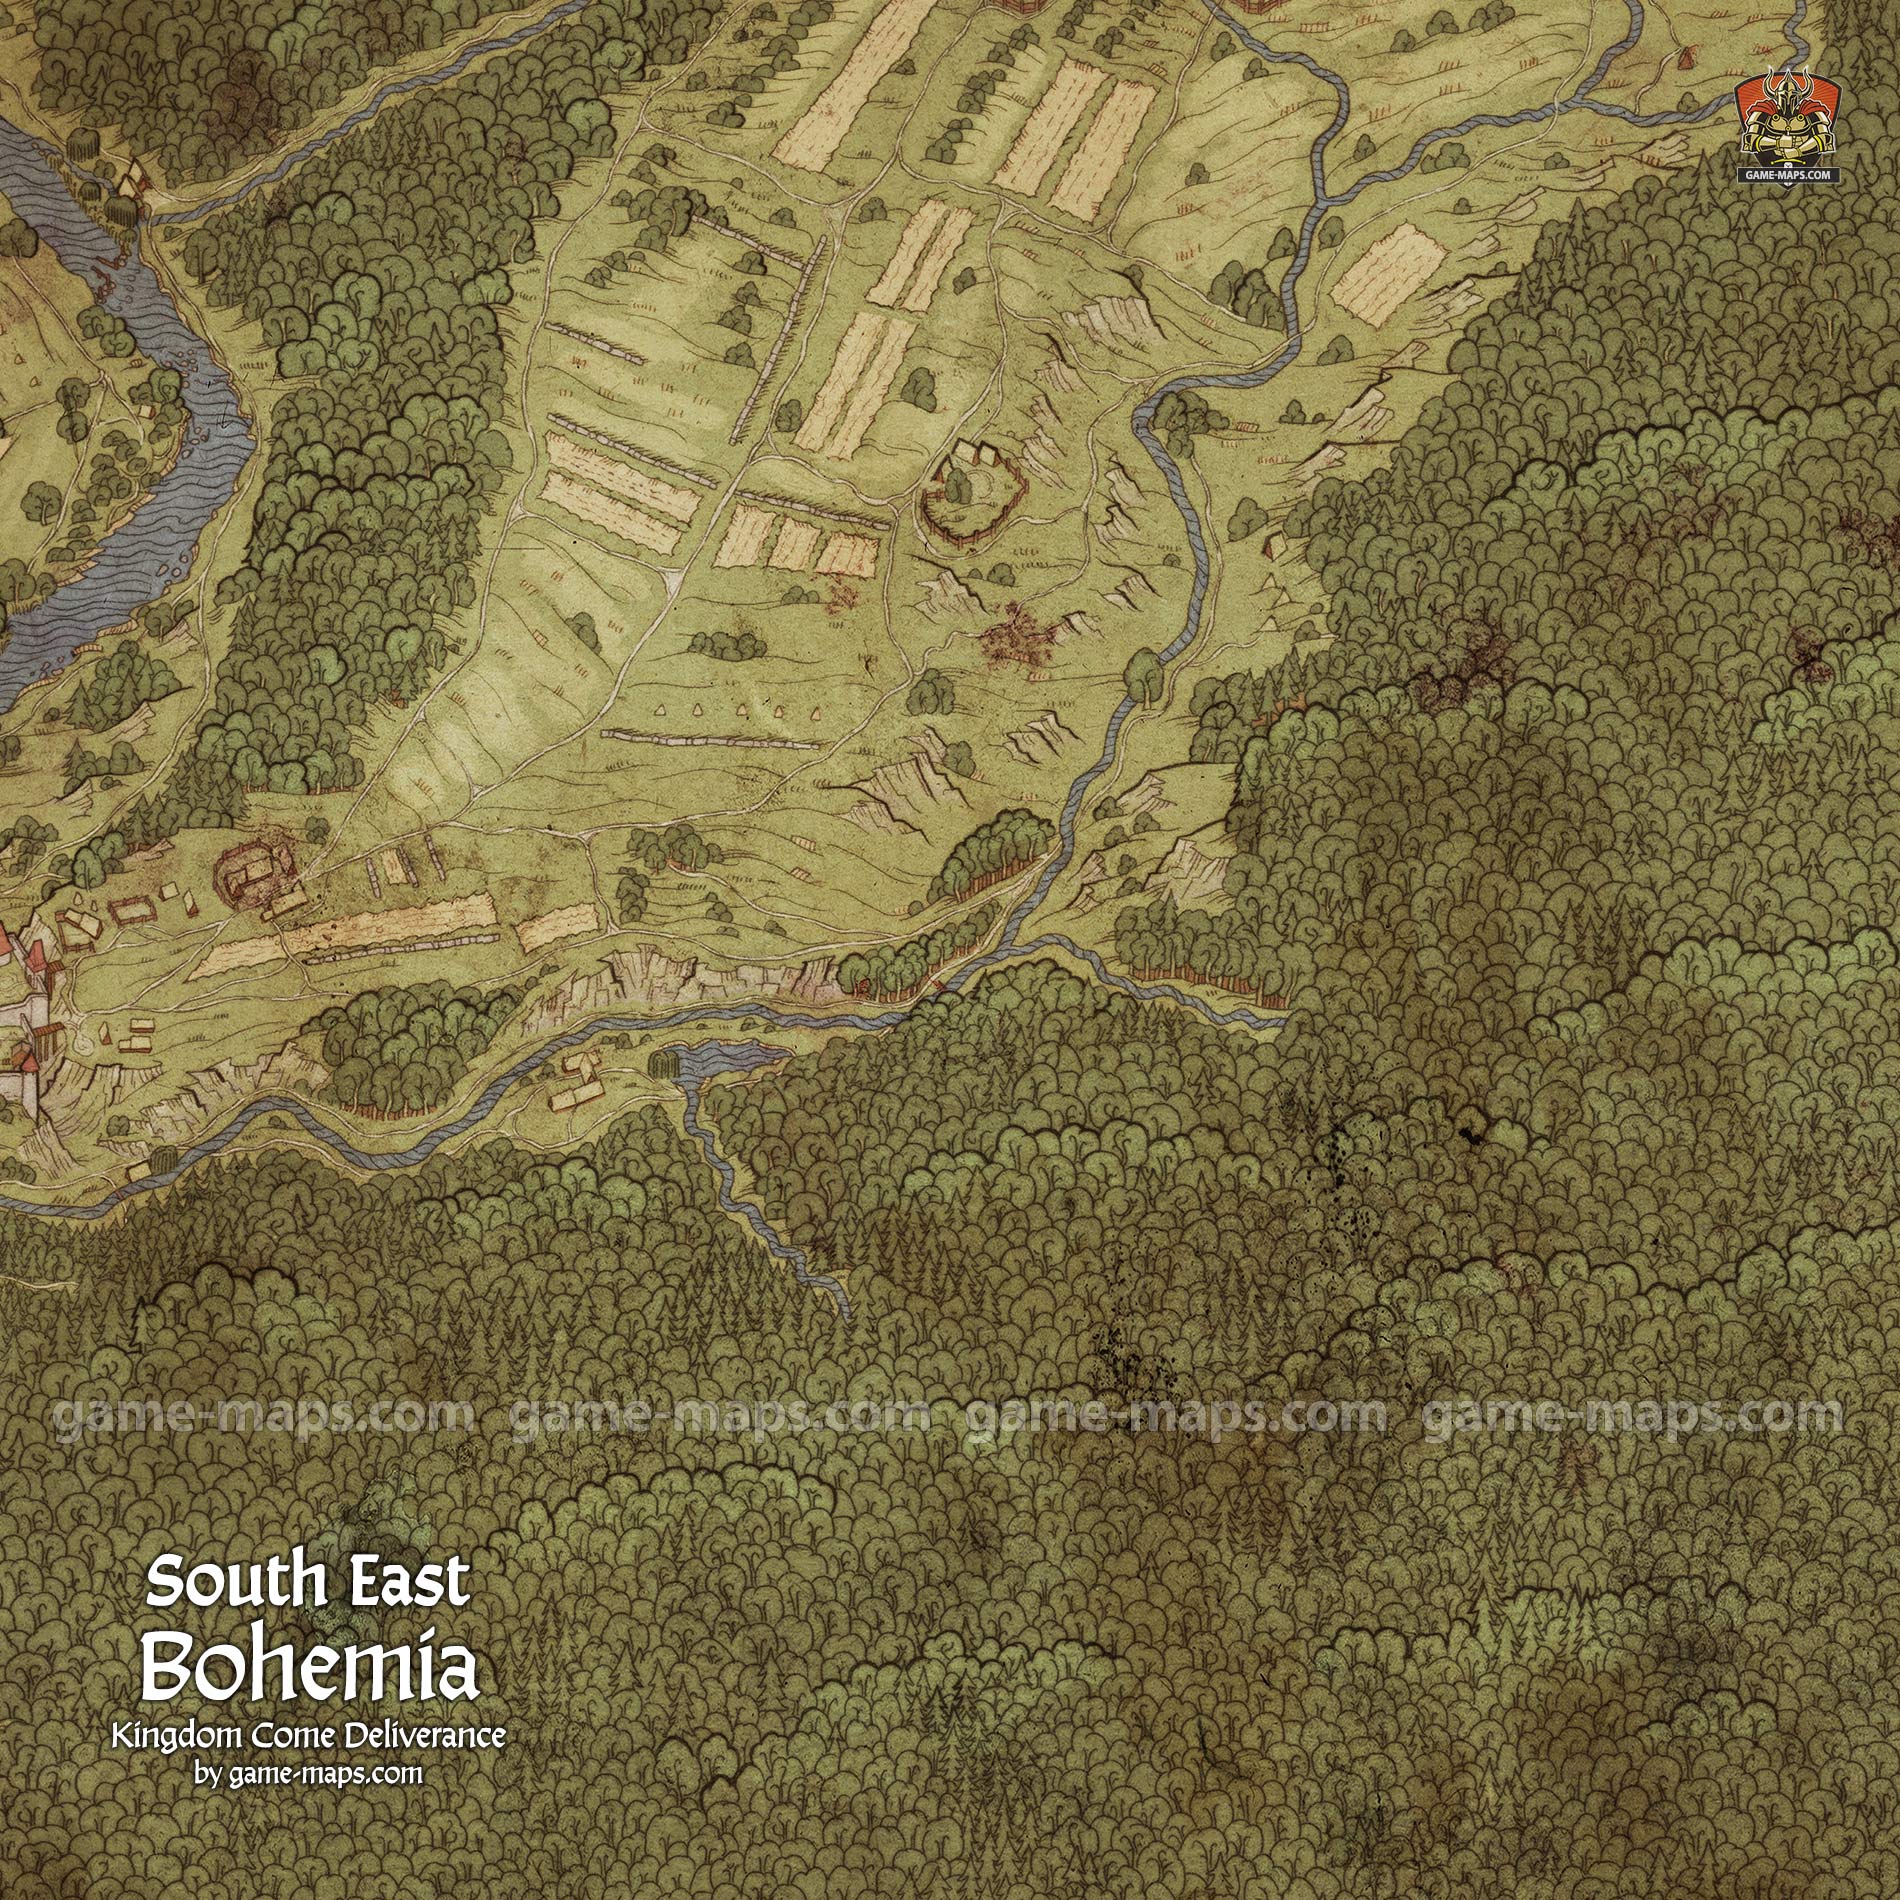 South East Bohemia Map for Kingdom Come deliverance